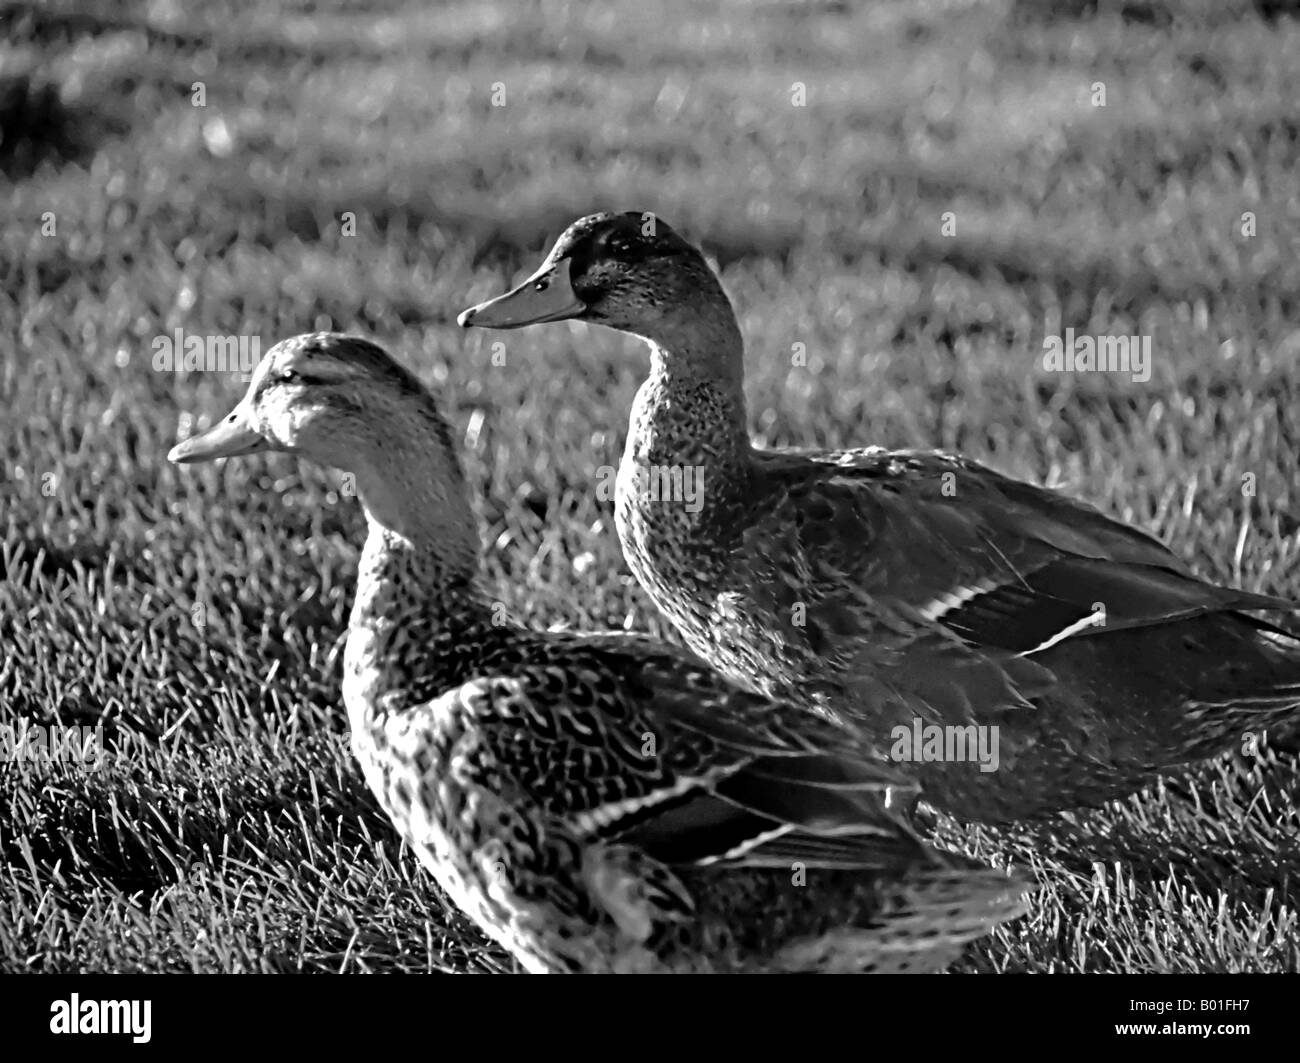 Two curious ducks in profile, shot in black and white, standing together on a lawn inside a business park in SLC, Utah, USA. Stock Photo